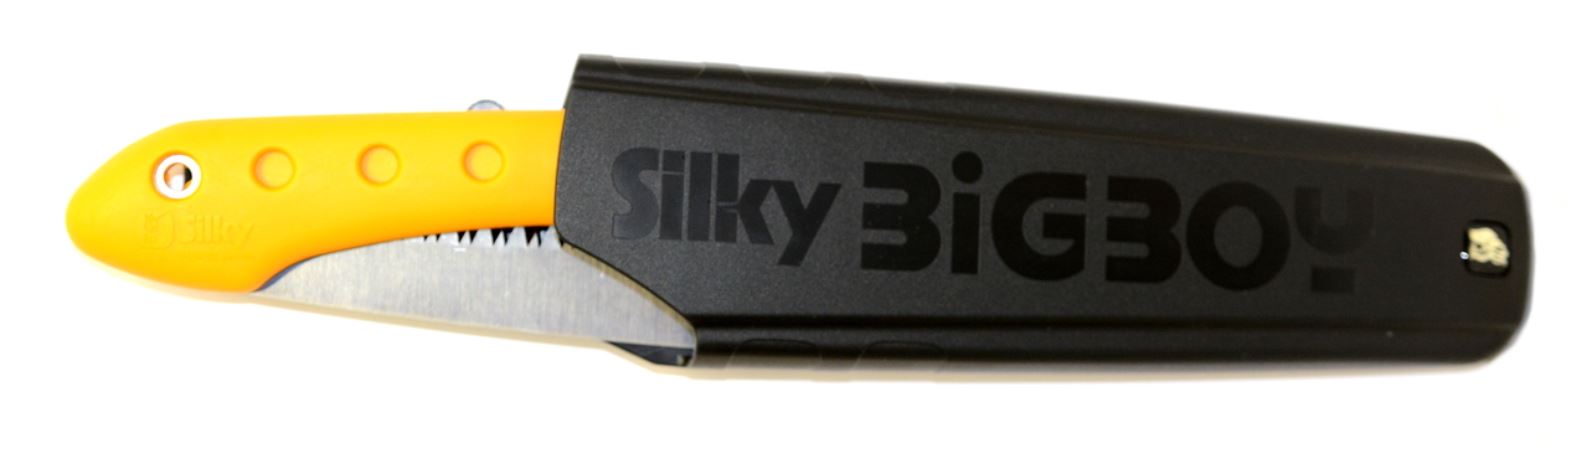 A yellow handled silky folding saw inside of the black durable plastic Silky Bigboy case.